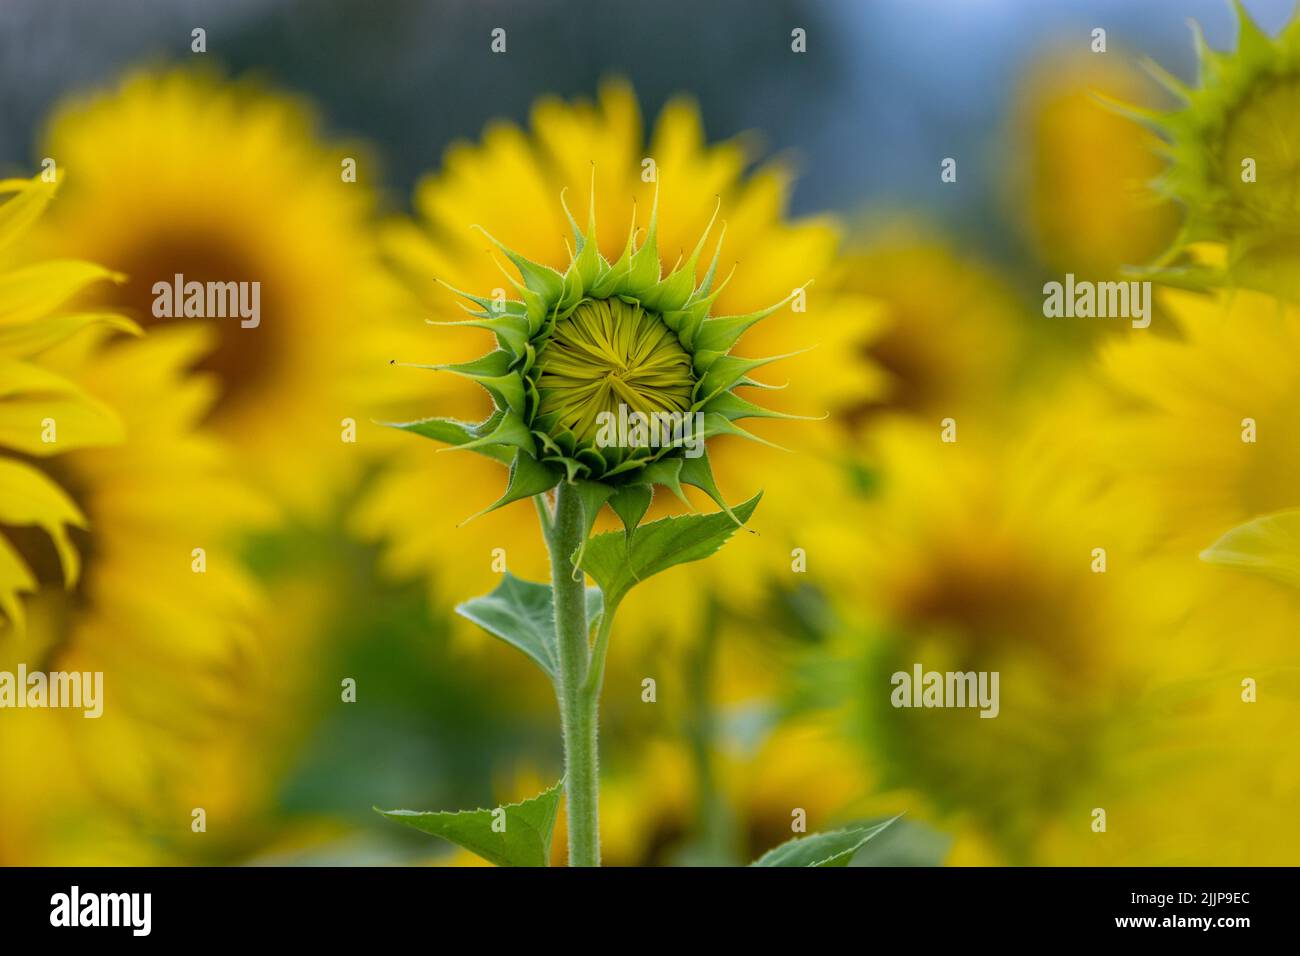 Unripe not opened sunflower above background of many yellow flowers Stock Photo